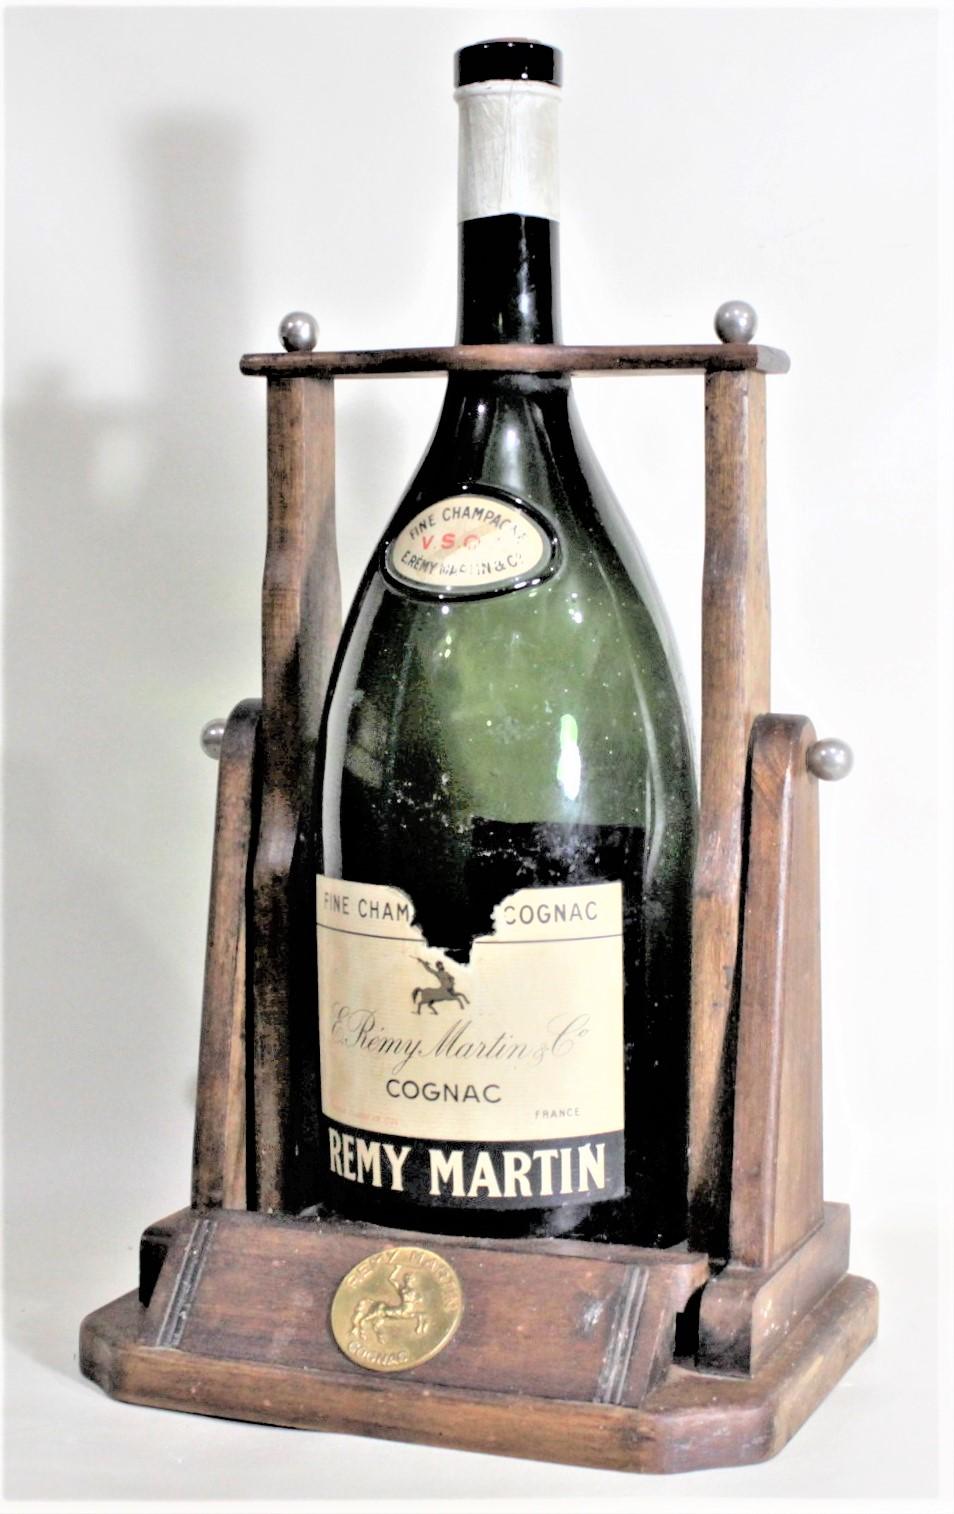 This large Mid-Century Modern era wooden bottle tipper was likely made and bottled in the United States for the premier French cognac Remy Martin in circa 1965. The bottle tipper is made of stained softwood with chrome lug nuts that secure the top